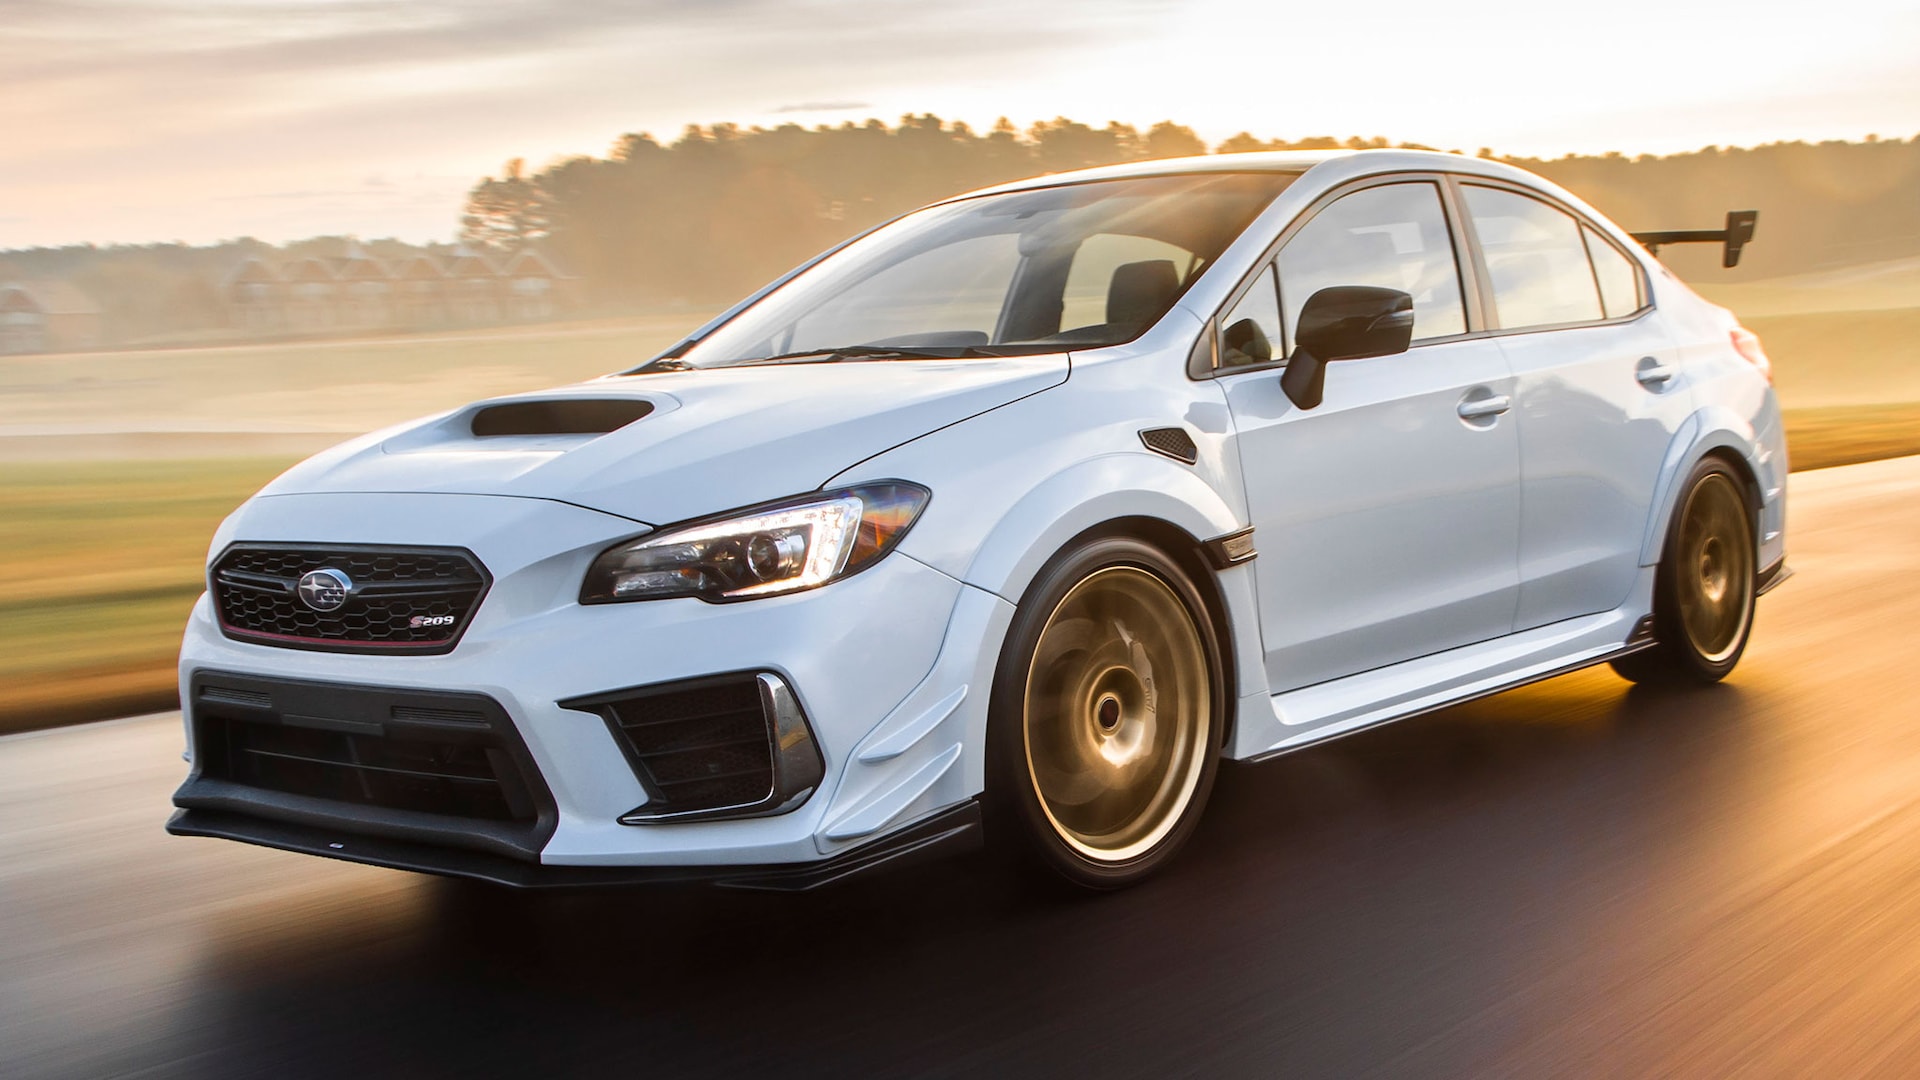 Subaru WRX STI S209 First Drive Review: Faster and Fantastic